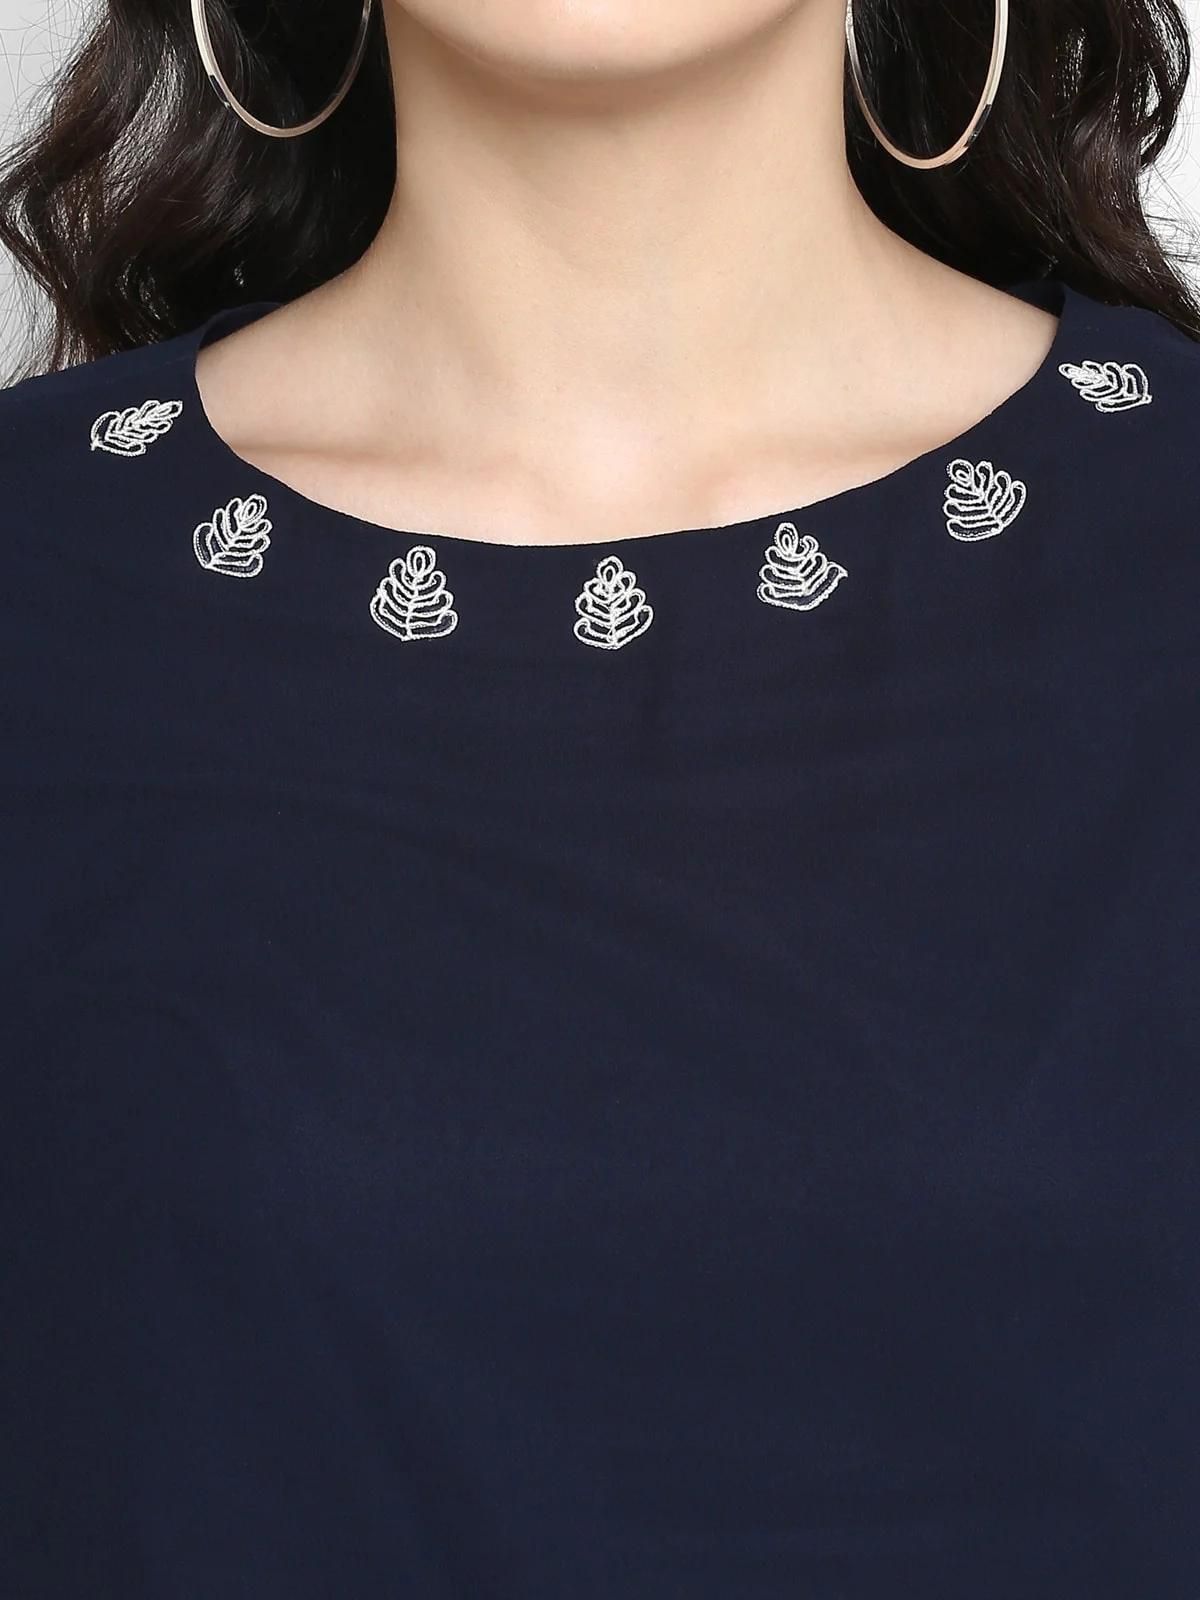 PANNKH Navy Blue Embroidered Sheer Top